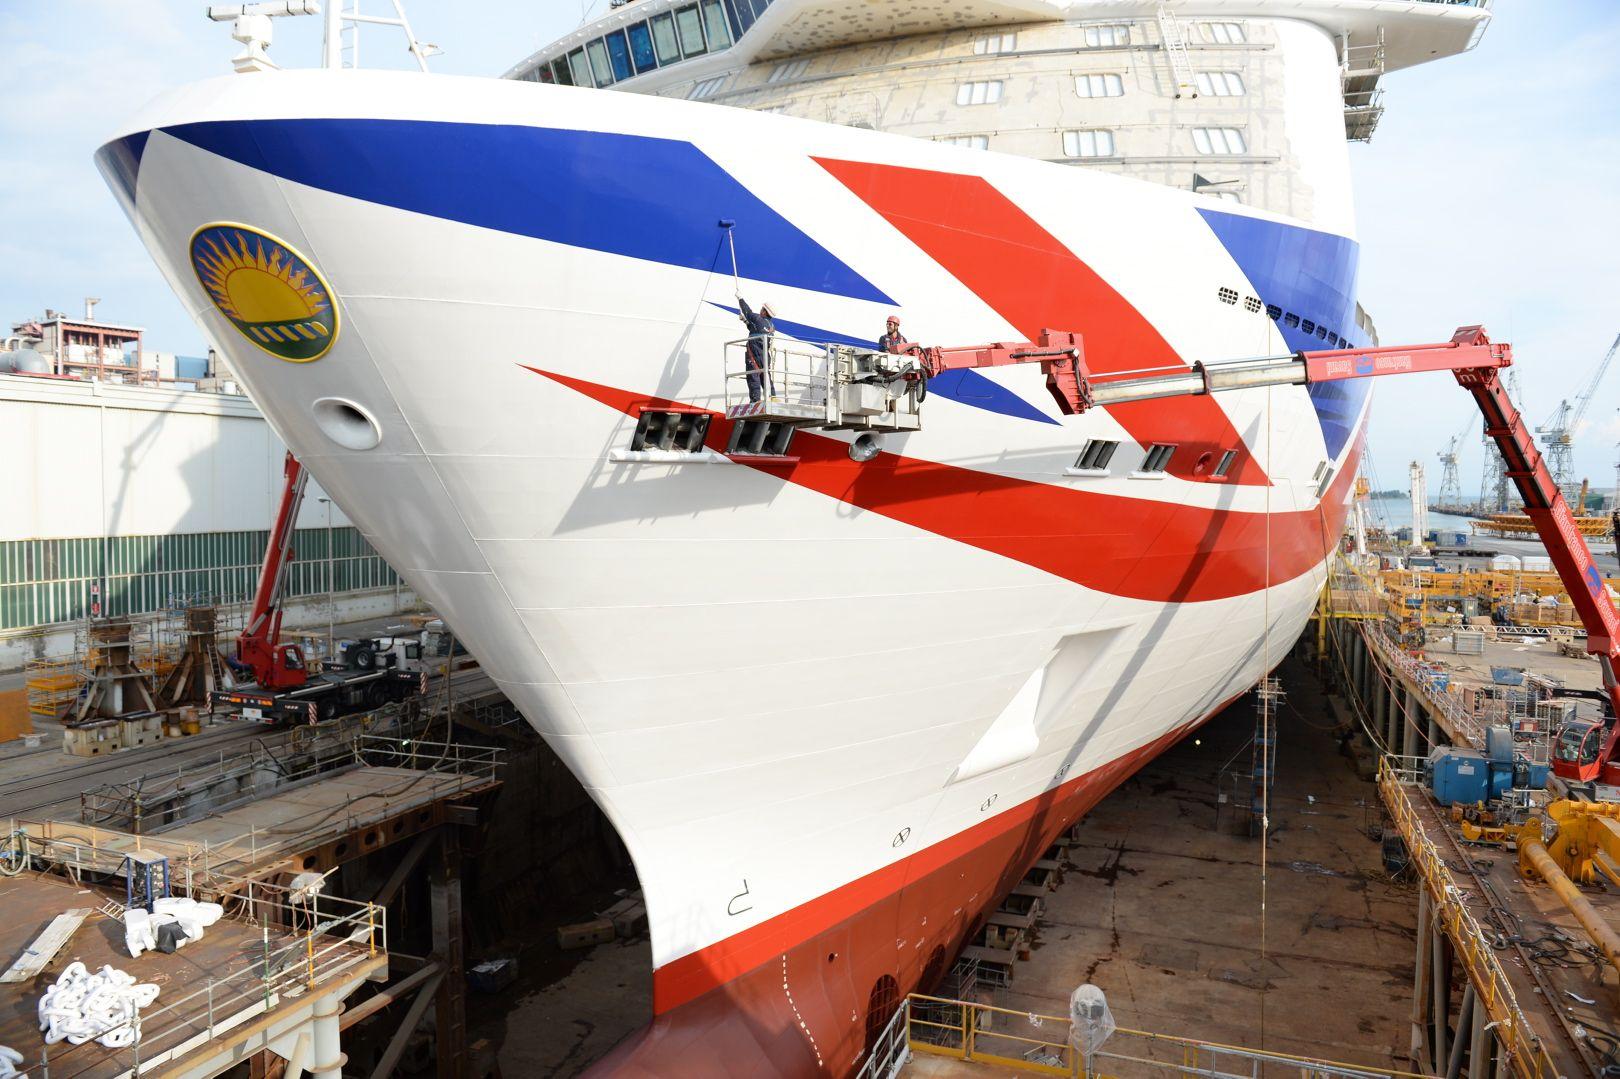 Red and White Ship Logo - P&O Cruises Britannia is Red, White And Blue. CruiseMiss Cruise Blog